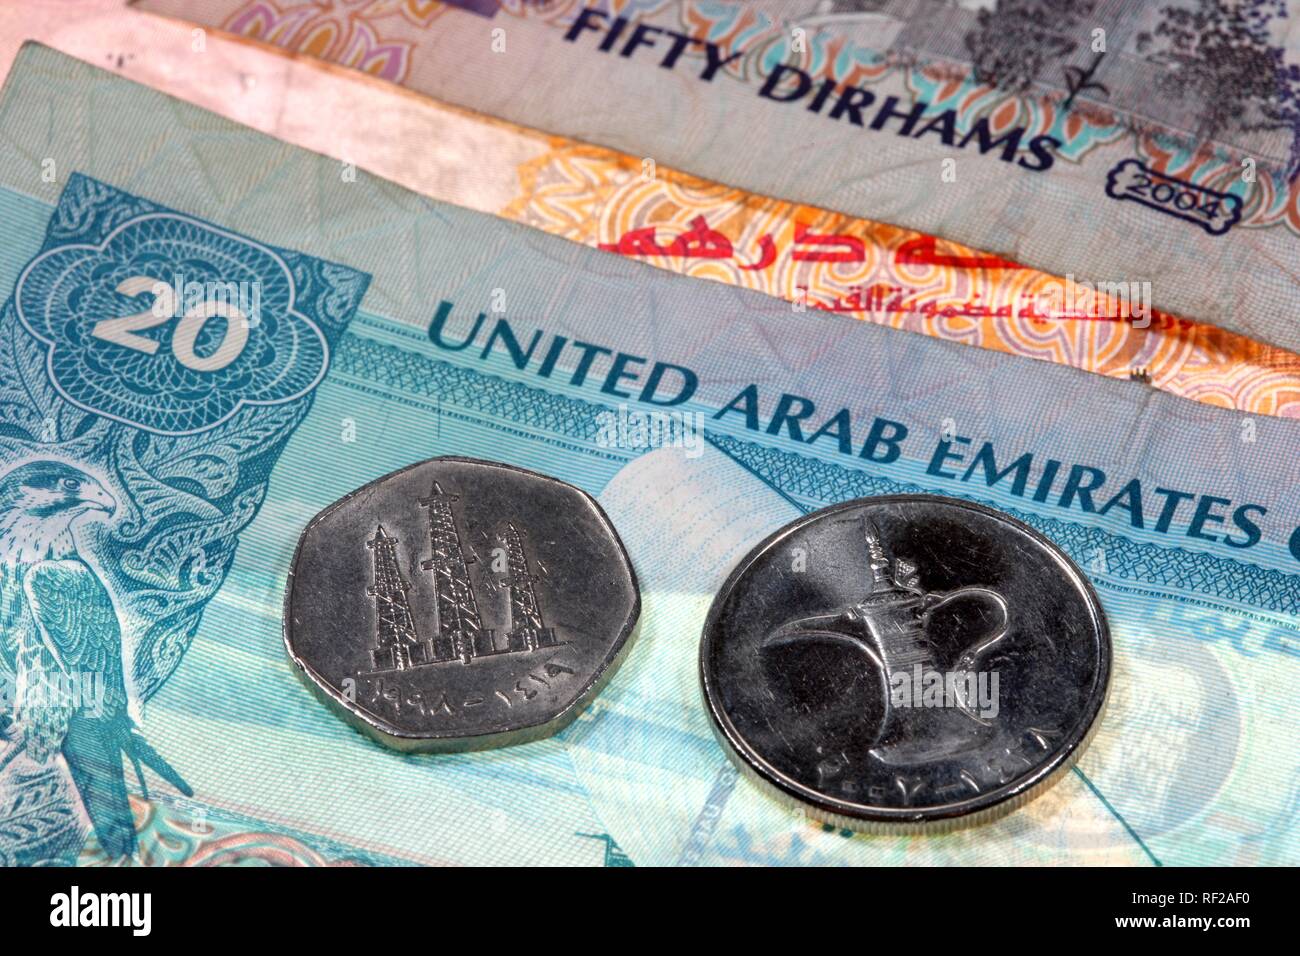 Dirham, AED, coin featuring oil tower motif, United Arab Emirates or UAE currency Stock Photo